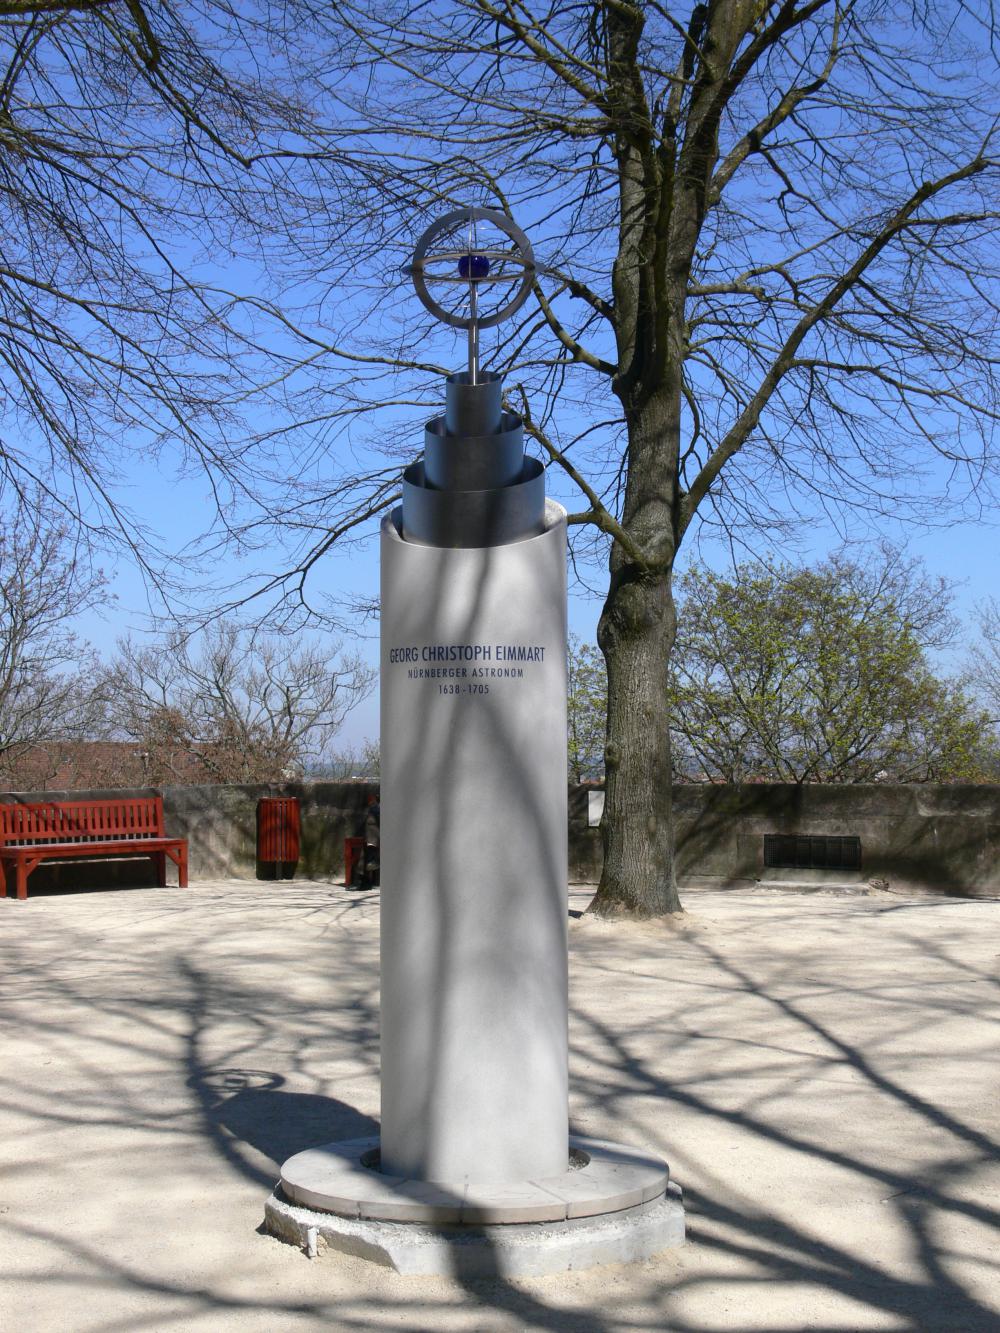 Monument for Eimmart on the bastion, 2007 (Wikiped